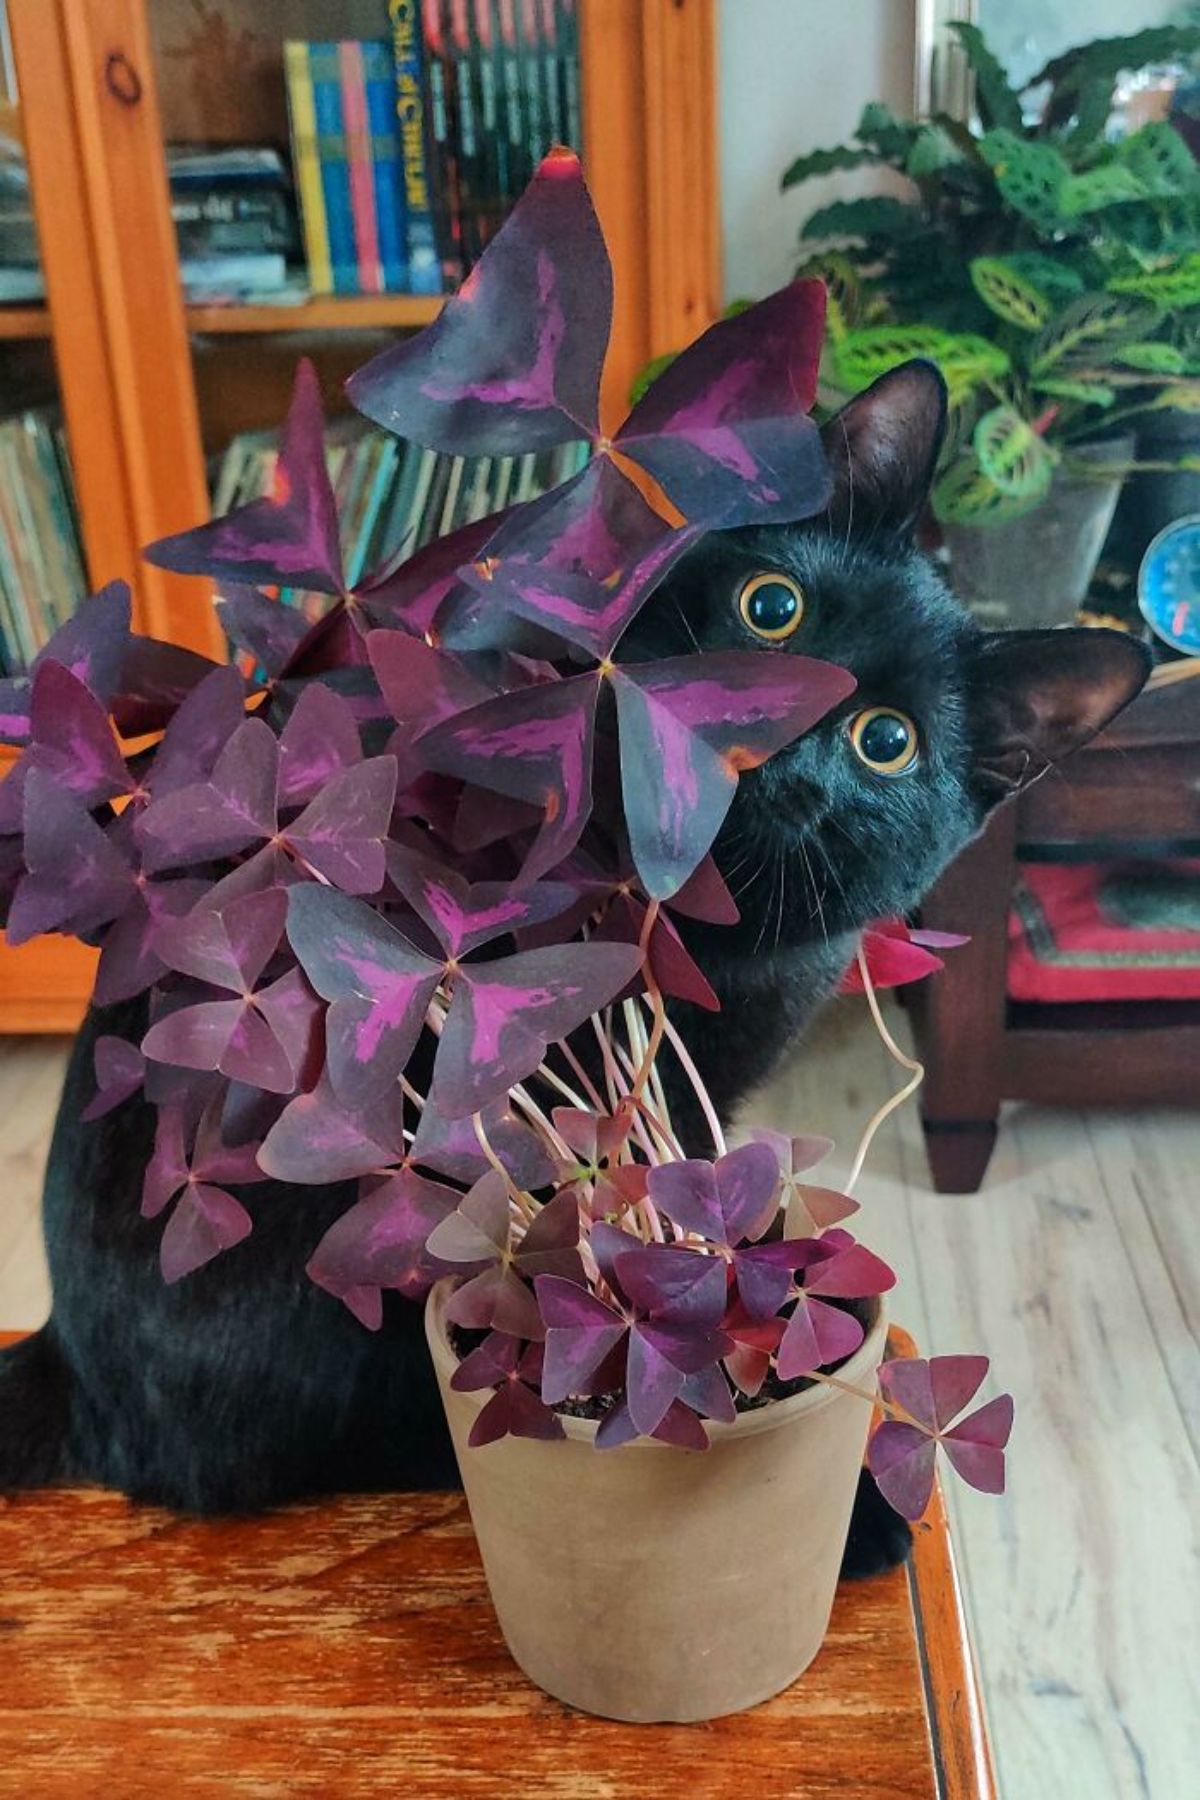 black cat peeking out from behind a plant with purple and black leaves